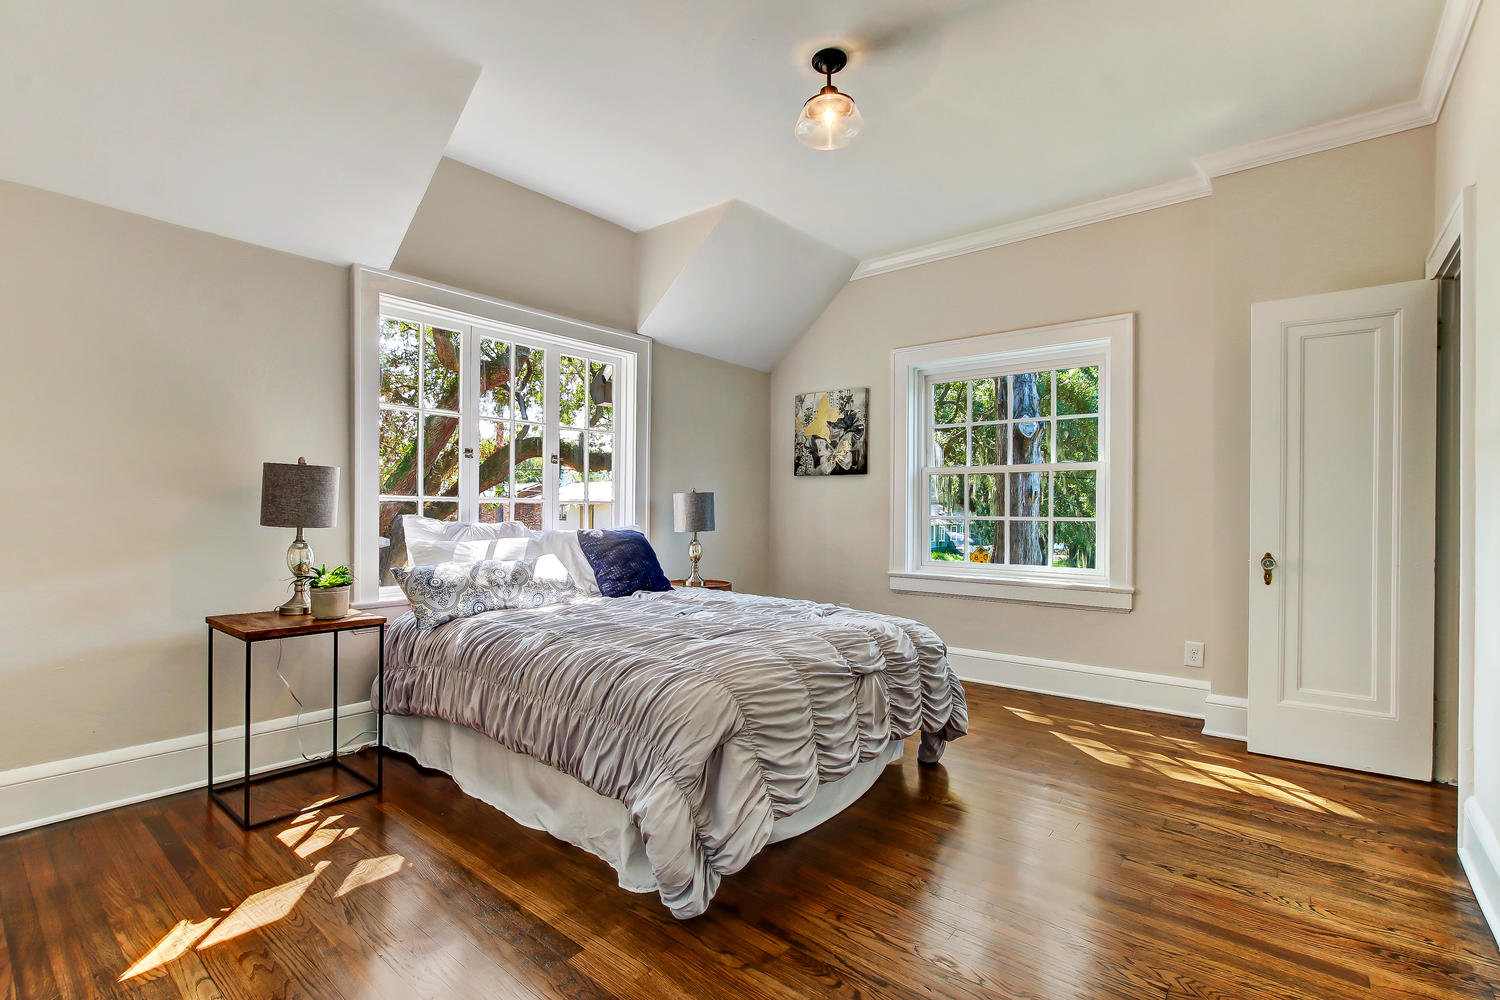 Spacious guestroom with hardwood floors and natural light